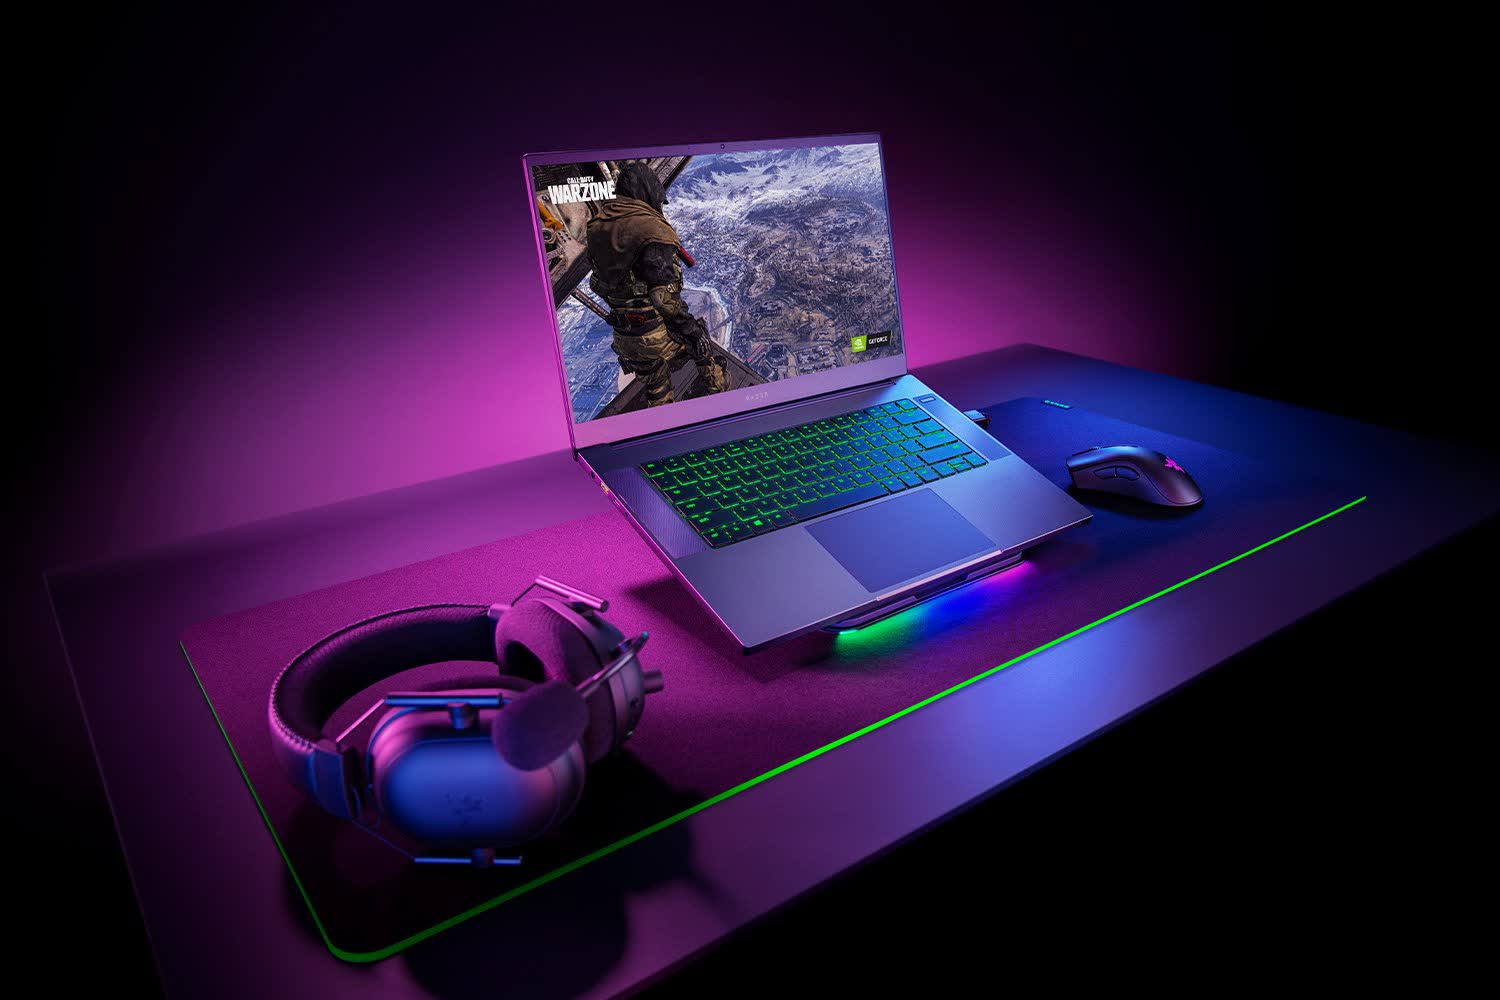 Razer announces a cheaper variant of the Blade 15 gaming laptop